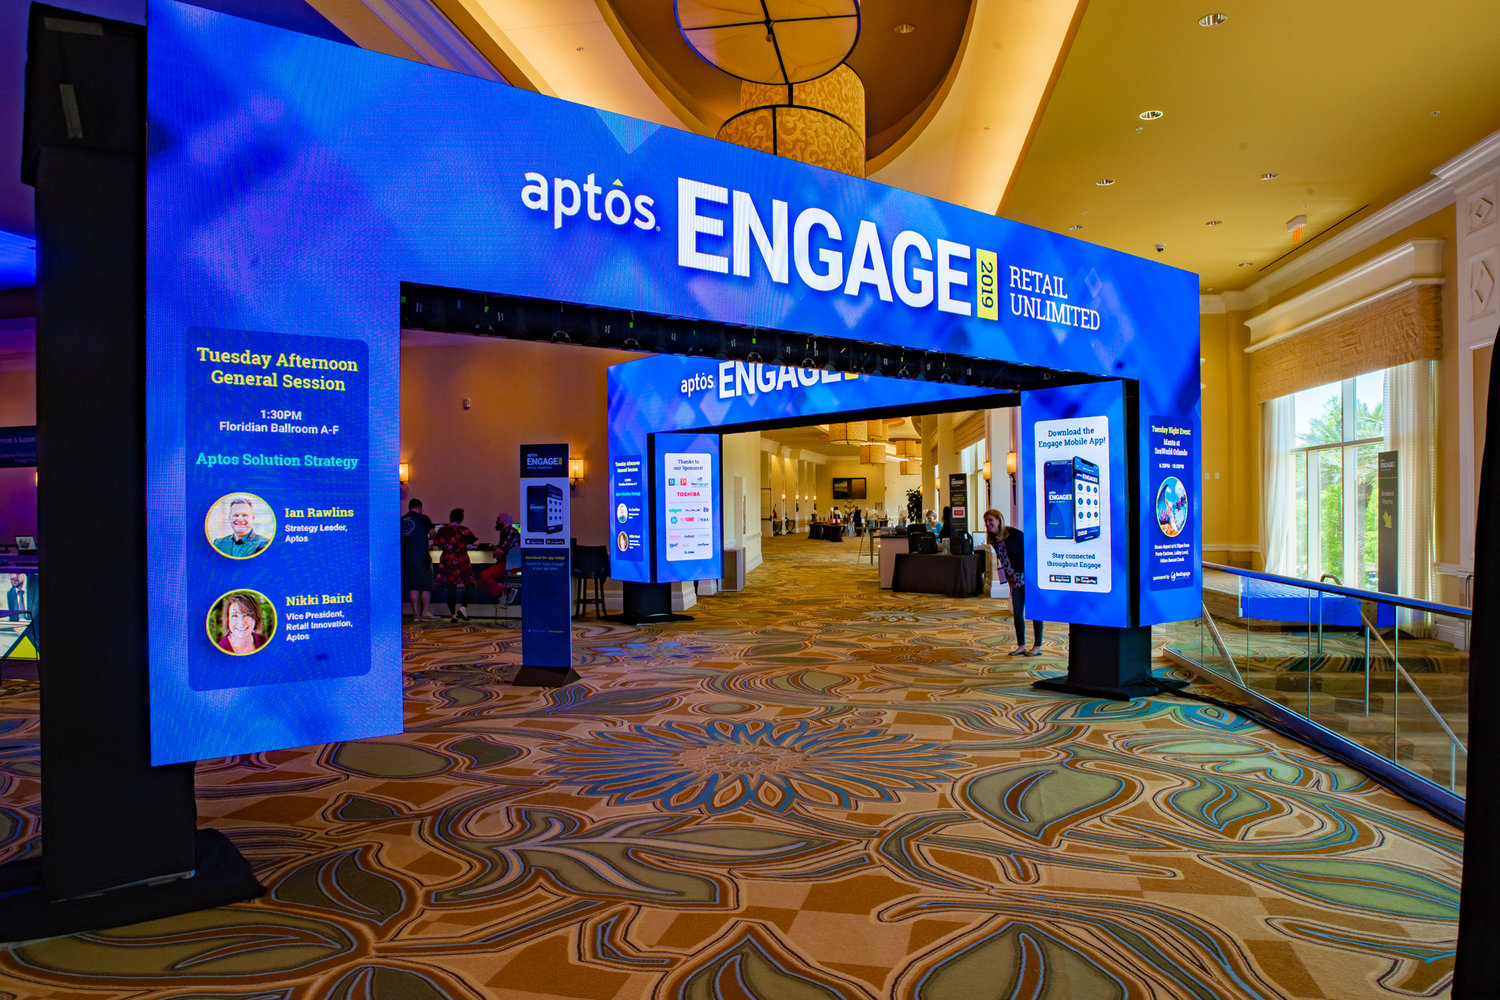 An LED Arch was set up for attendees of the Aptos Engage 2019 Conferece to walk through. Tri-Marq uses LED features to wow event goers.